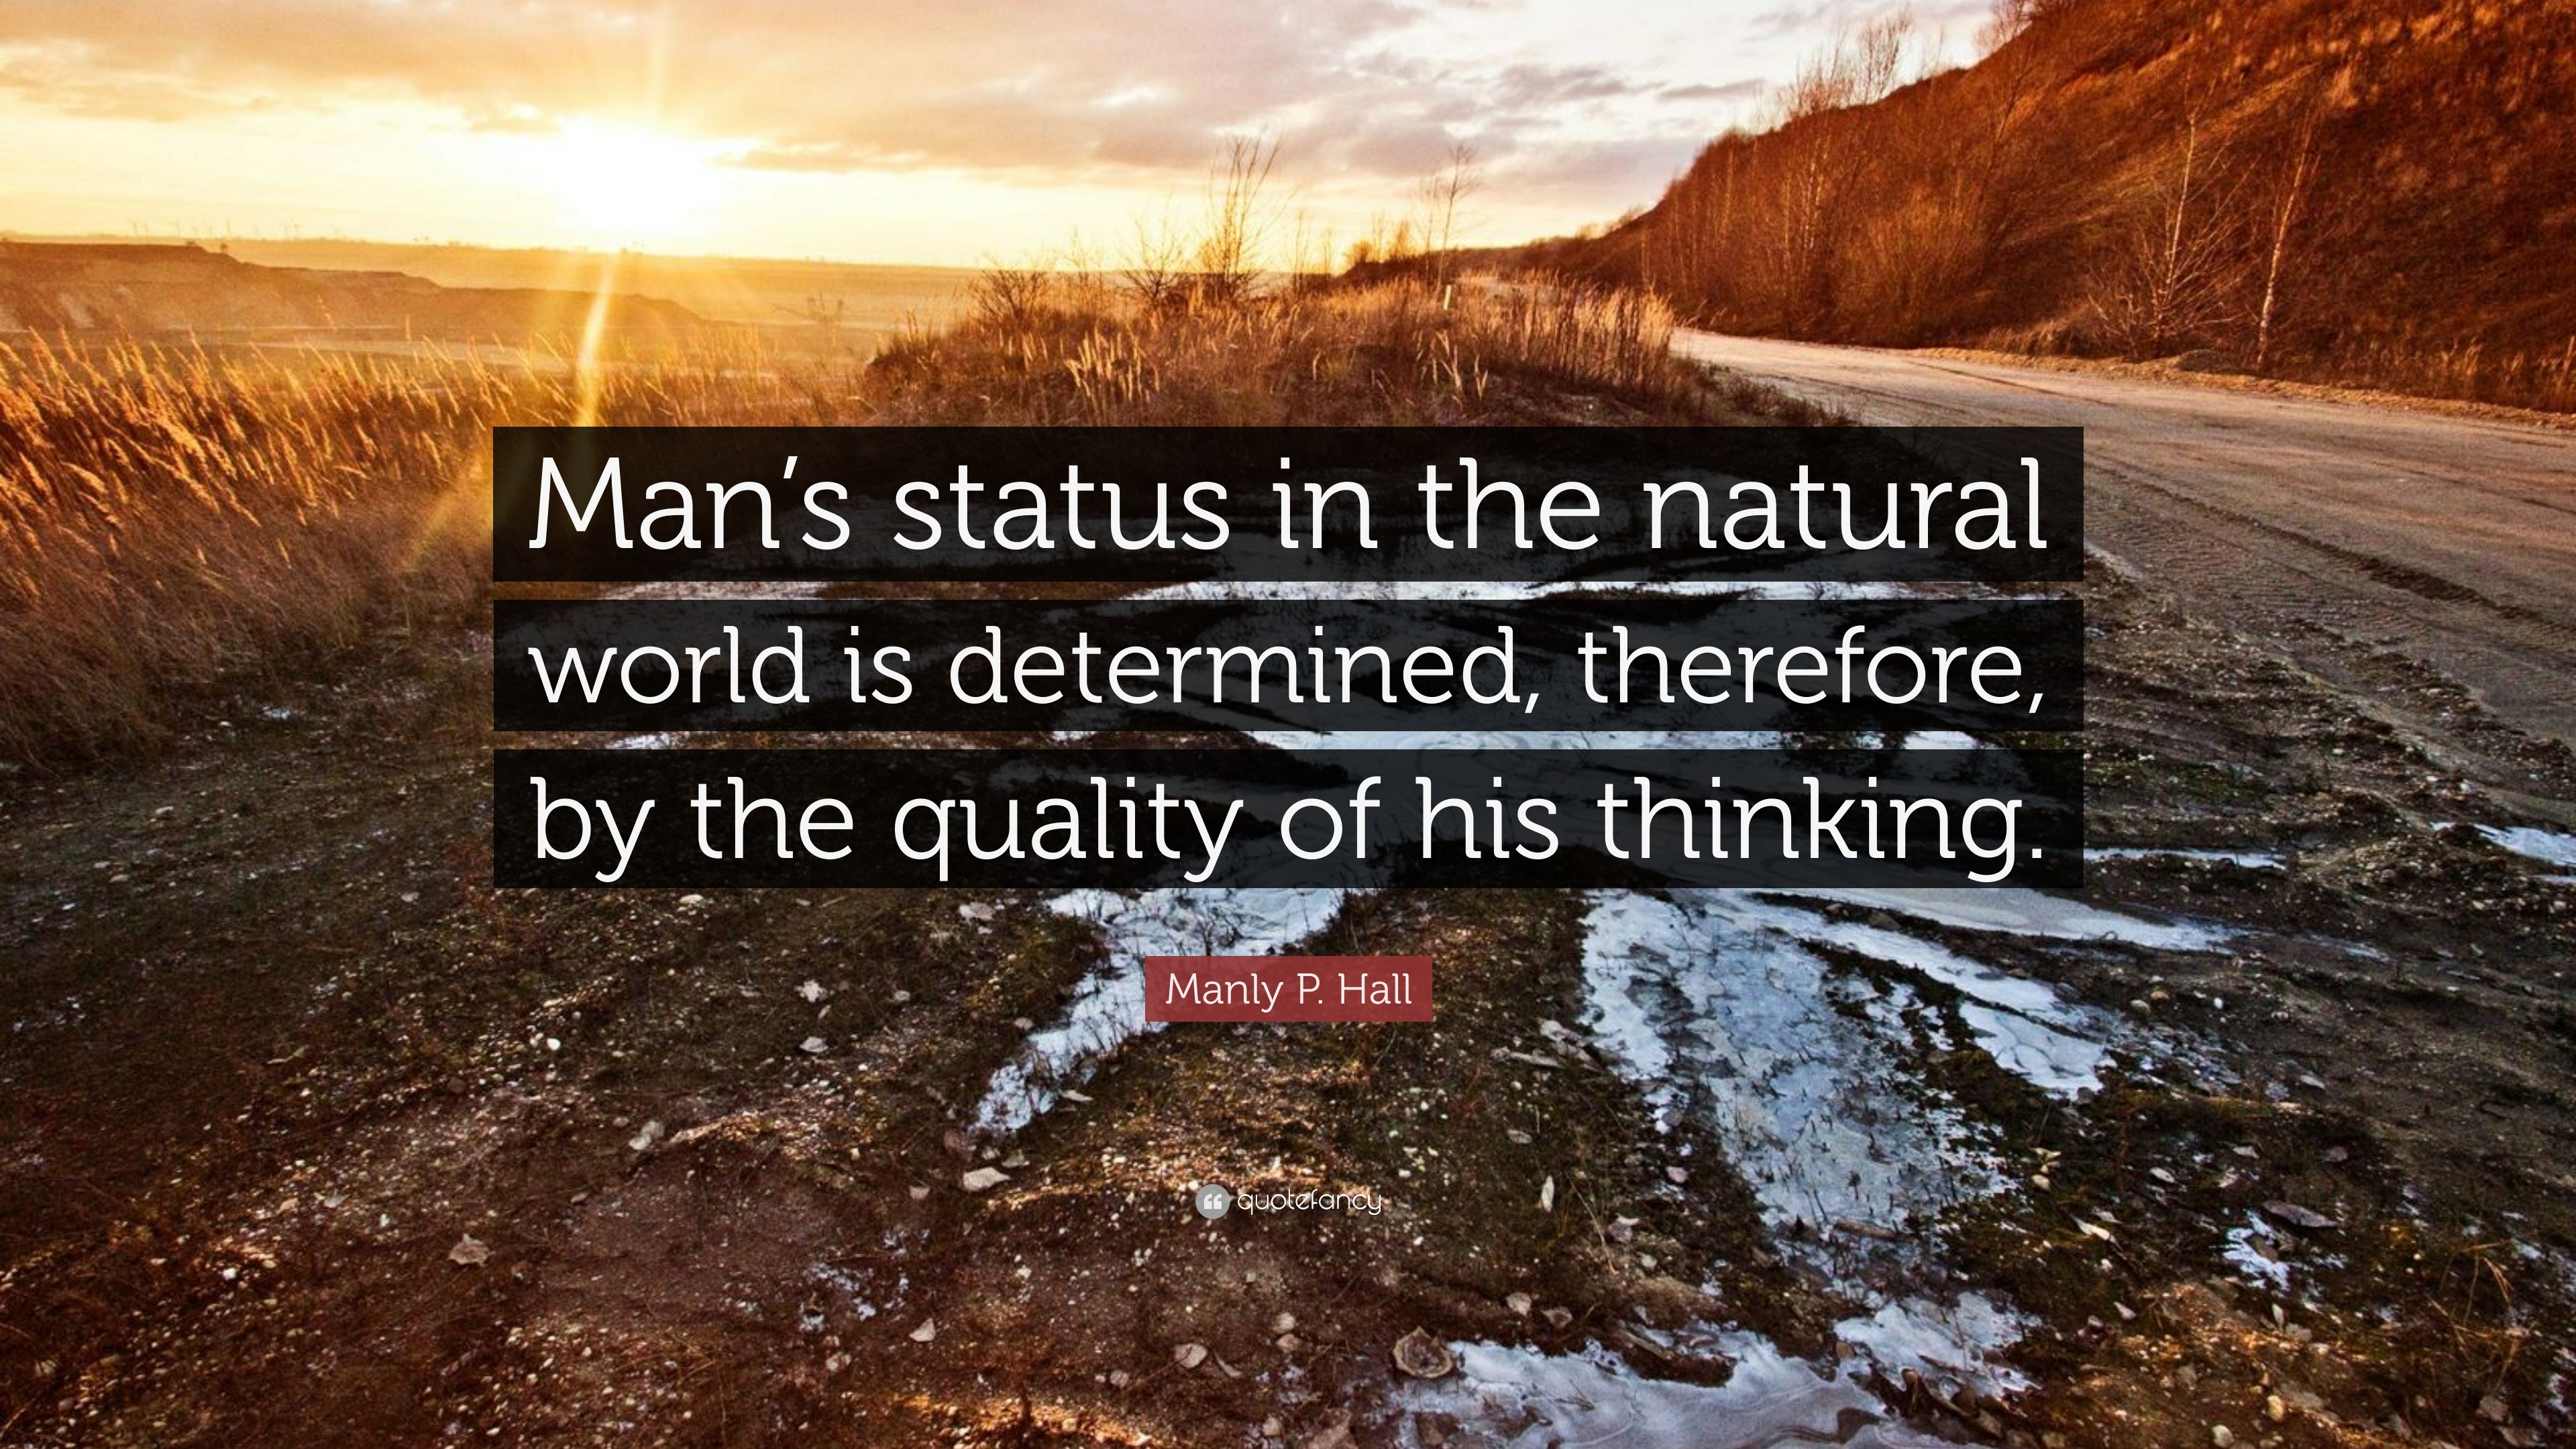 Manly P Hall Quote “Man s status in the natural world is determined